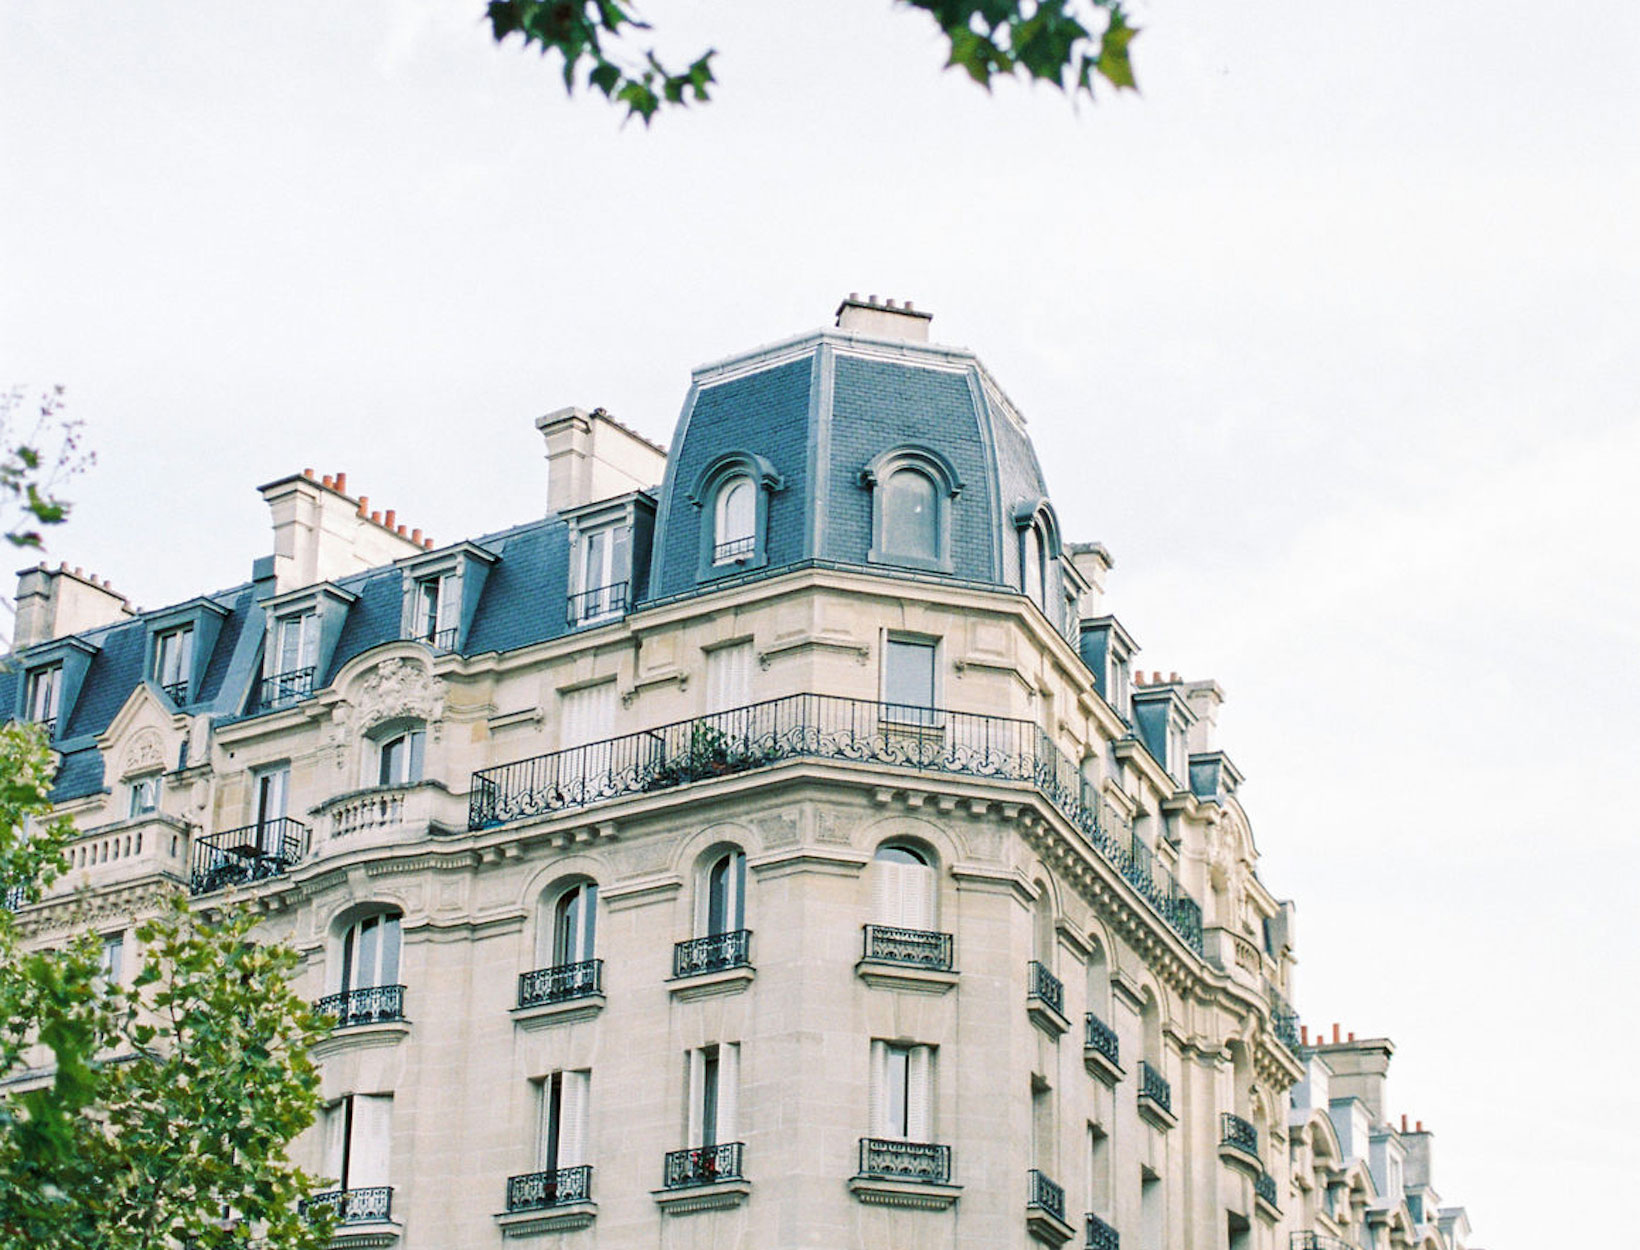 Get ready for Louis Vuitton's first-ever luxury hotel: the Paris